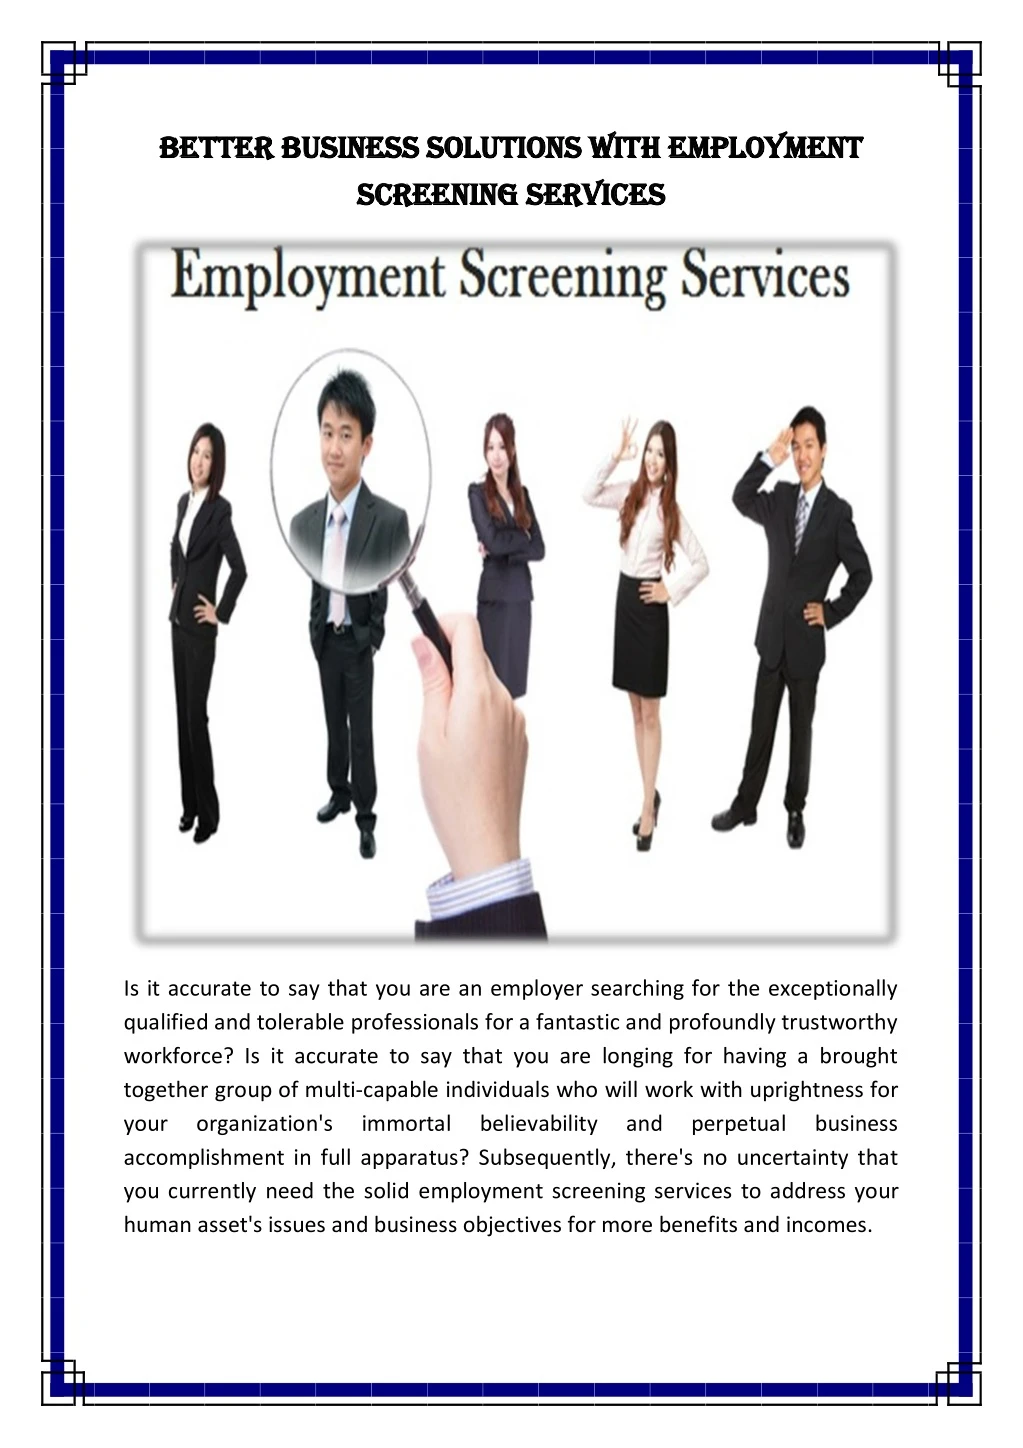 better business solutions with employment better